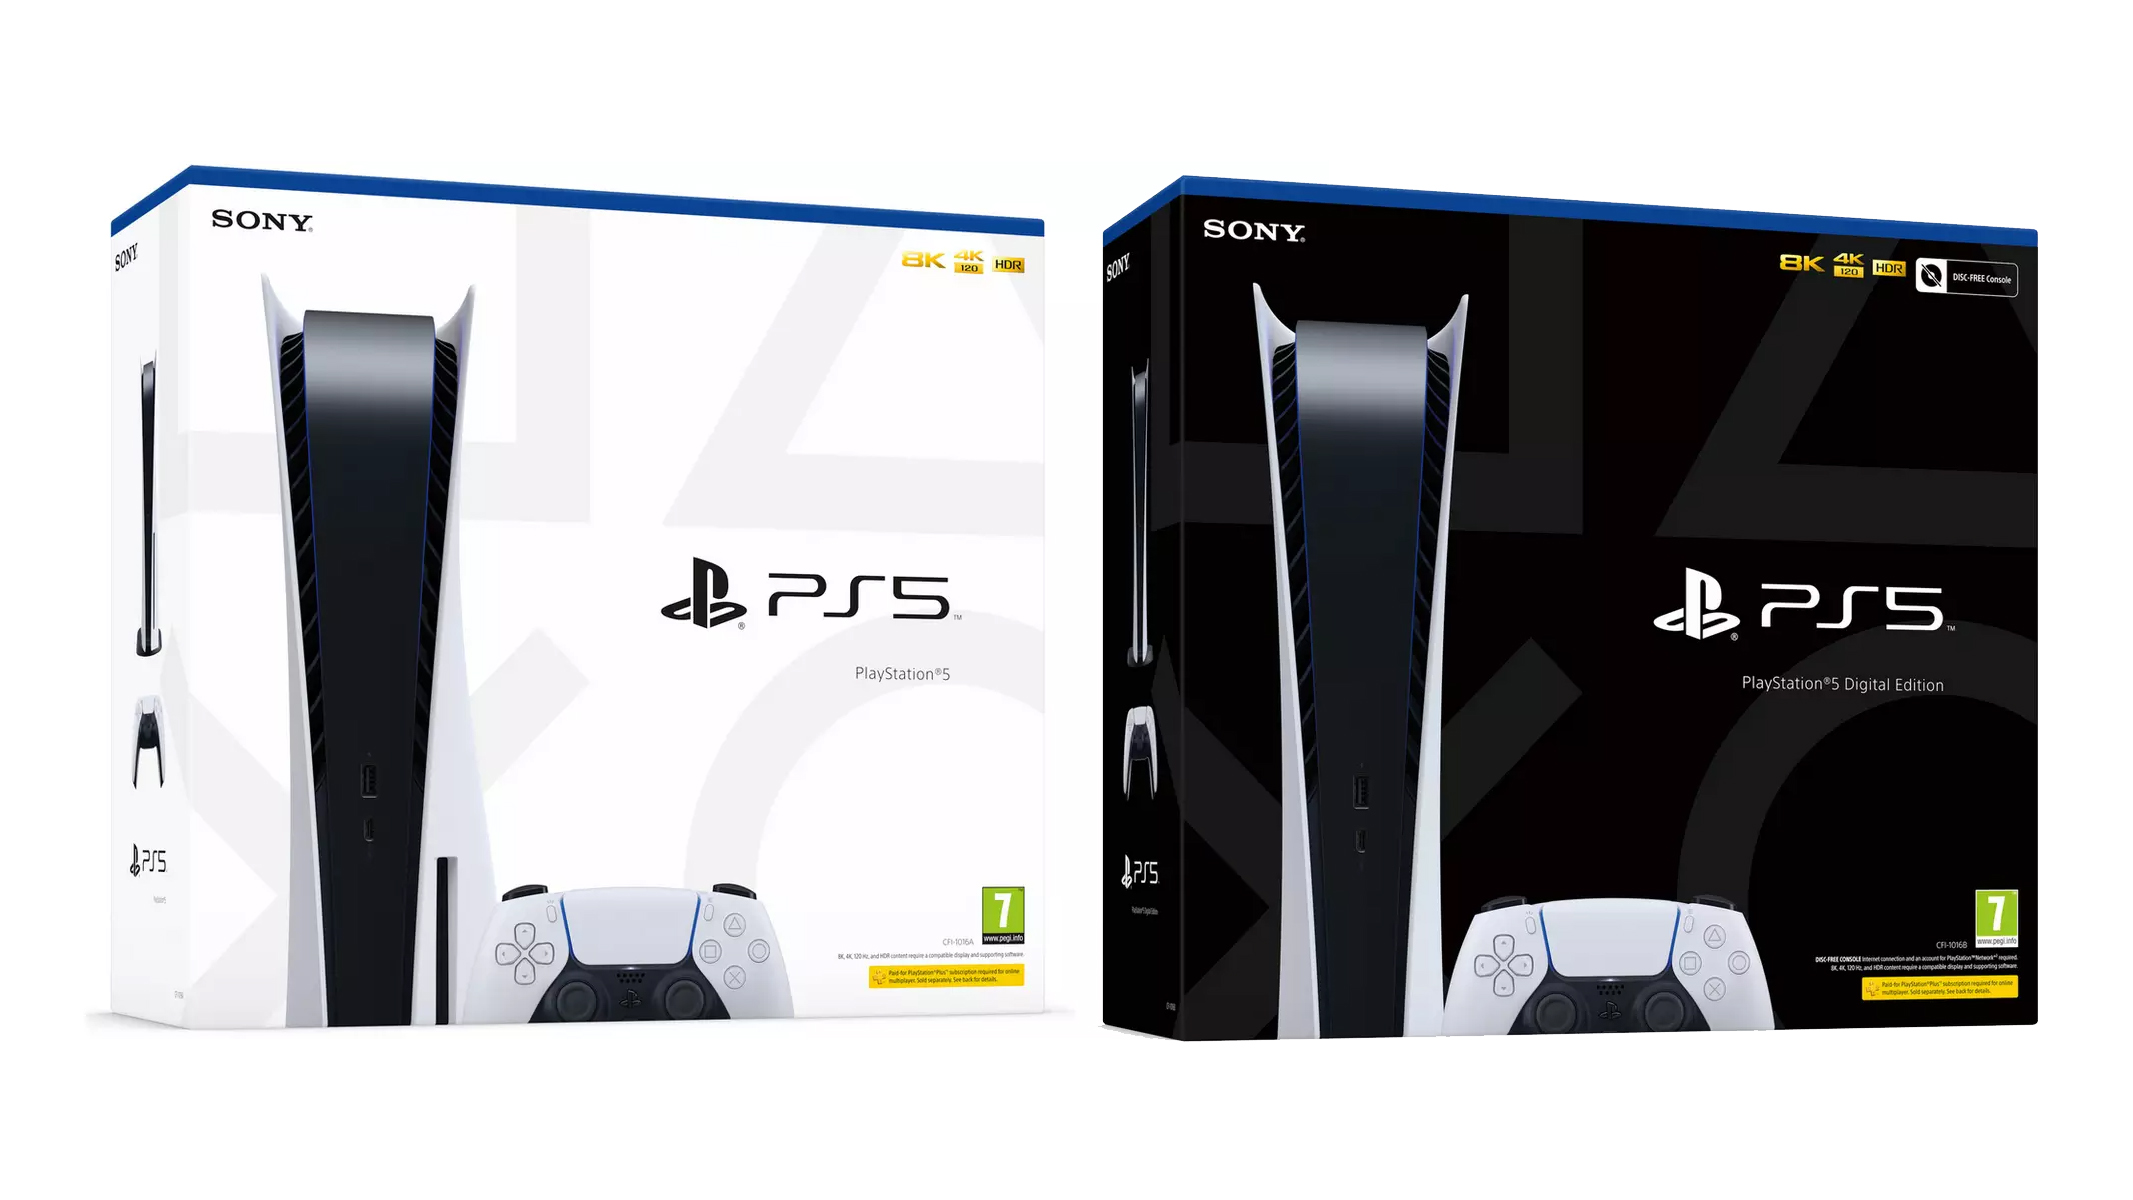 ps5 and ps5 digital